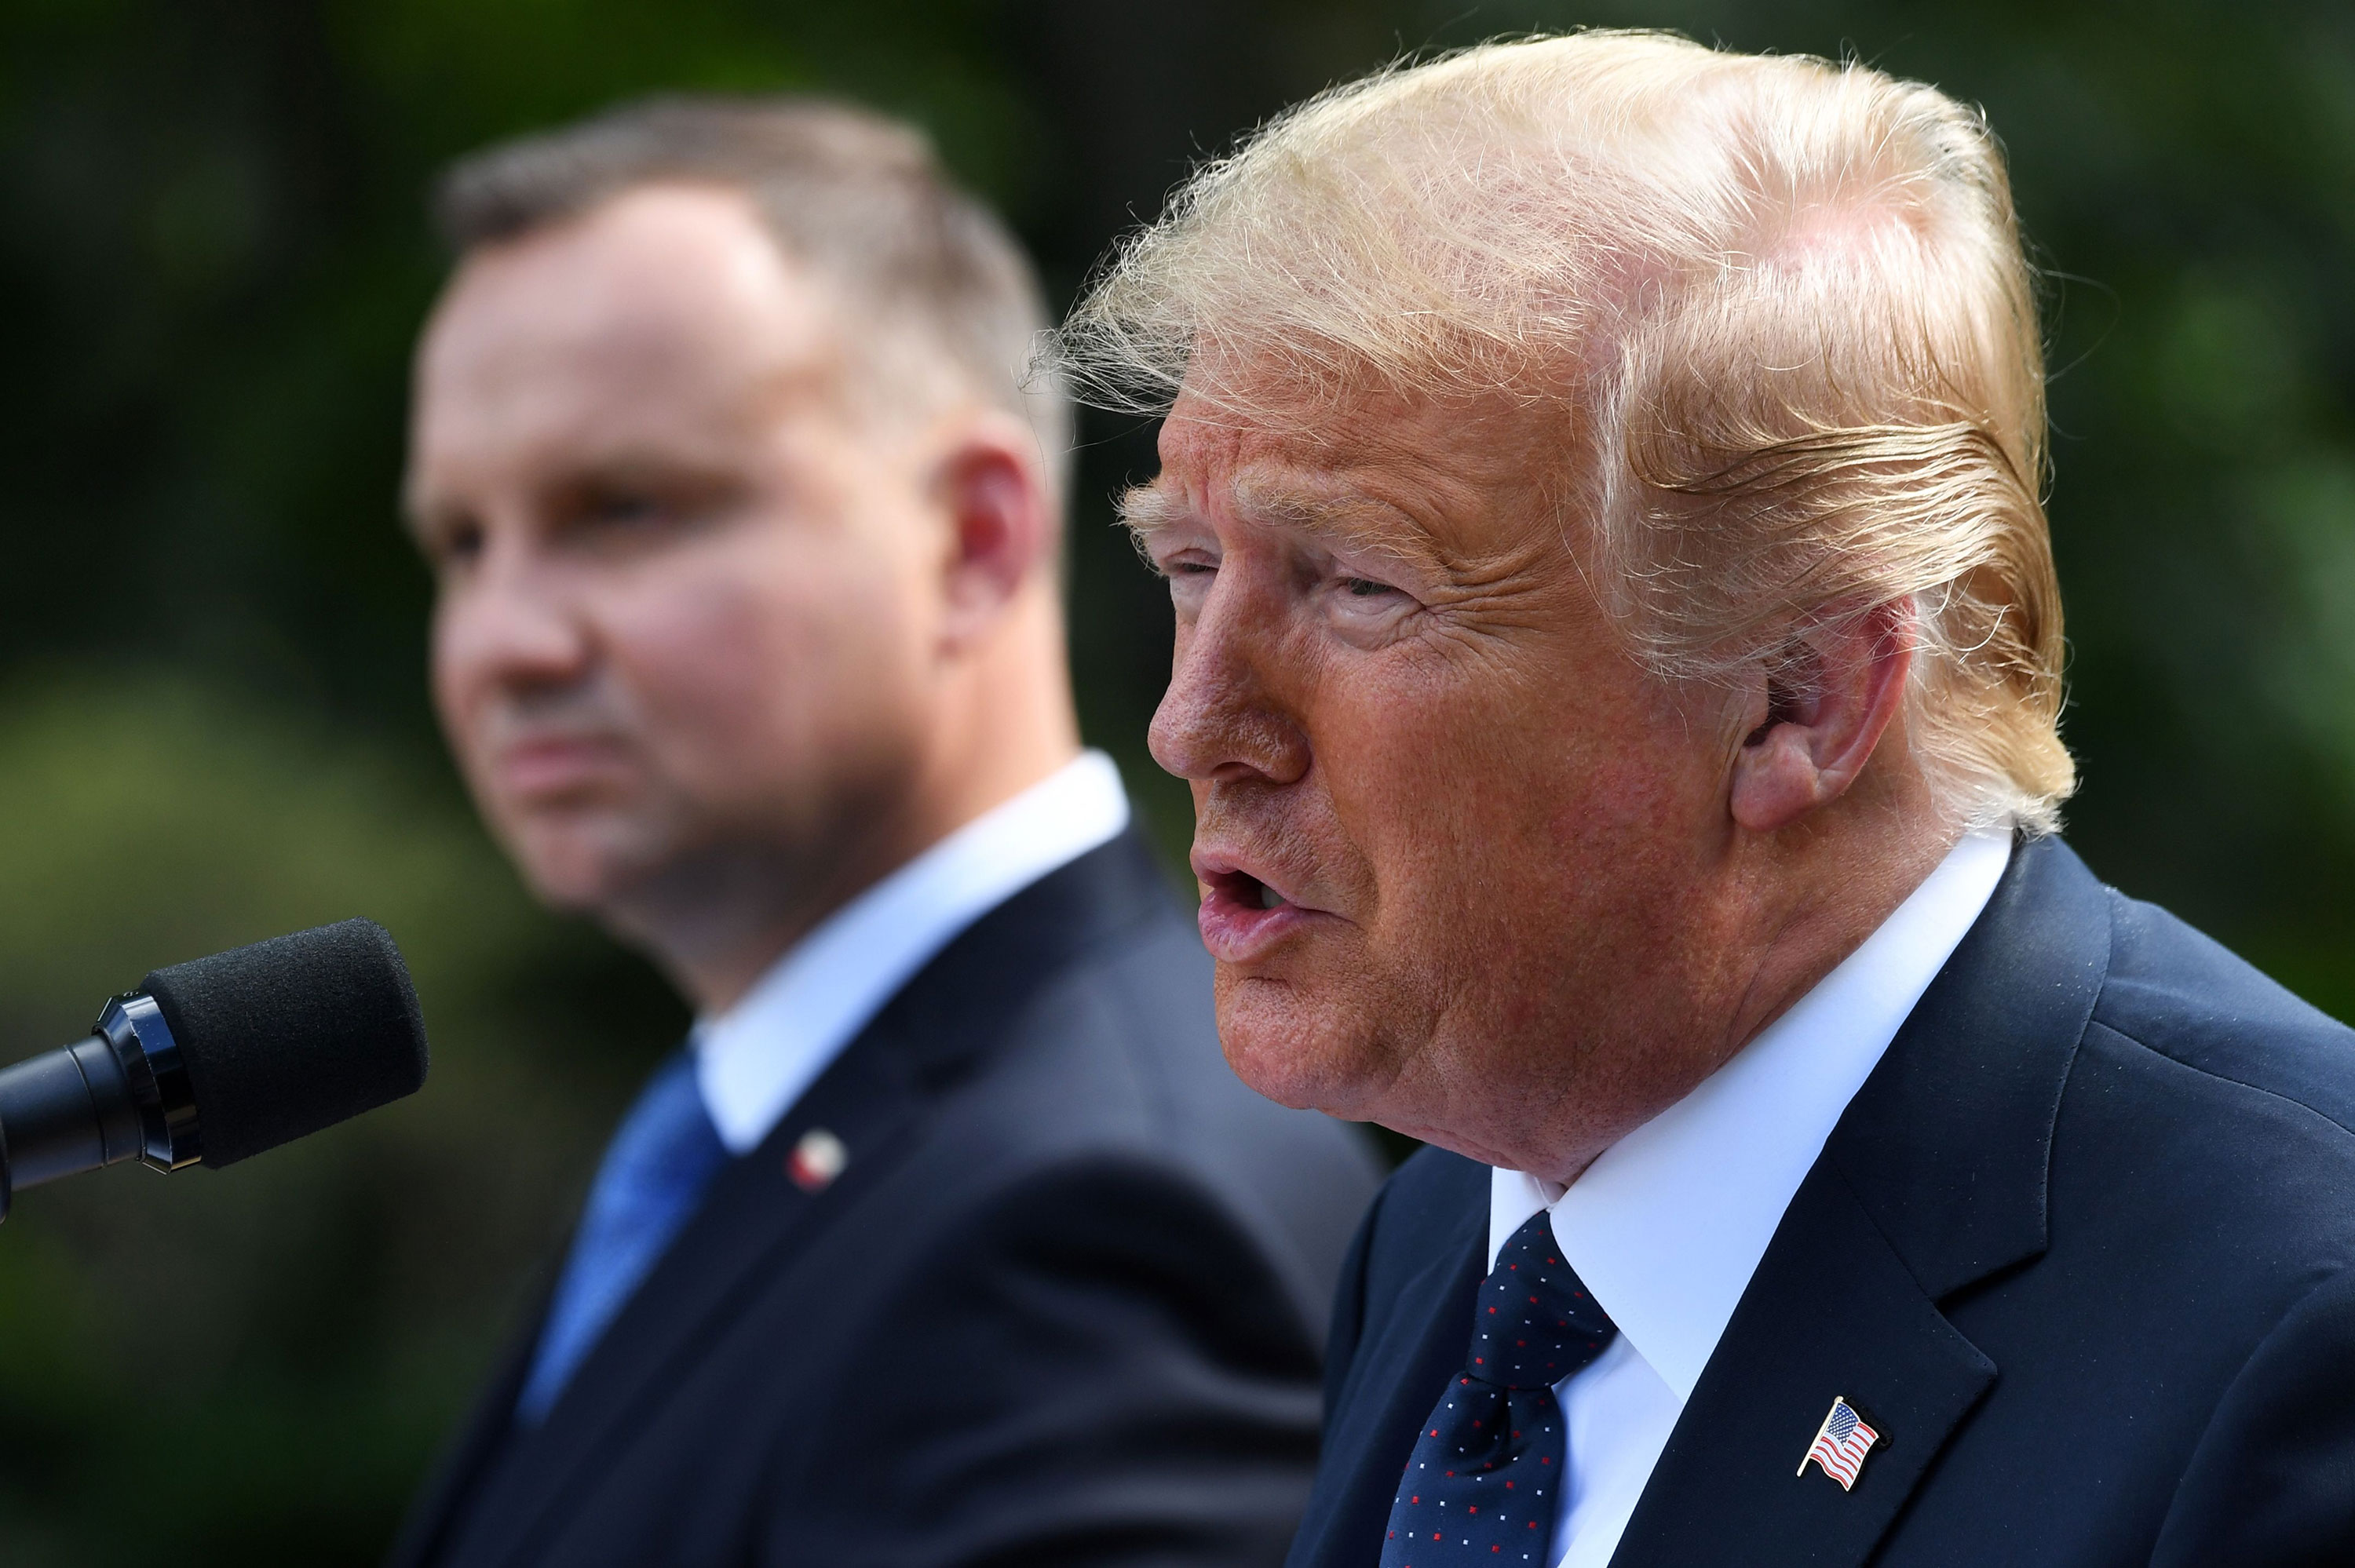 US President Donald Trump and Polish President Andrzej Duda hold a joint press conference in the Rose Garden of the White House on, June 24 in Washington.